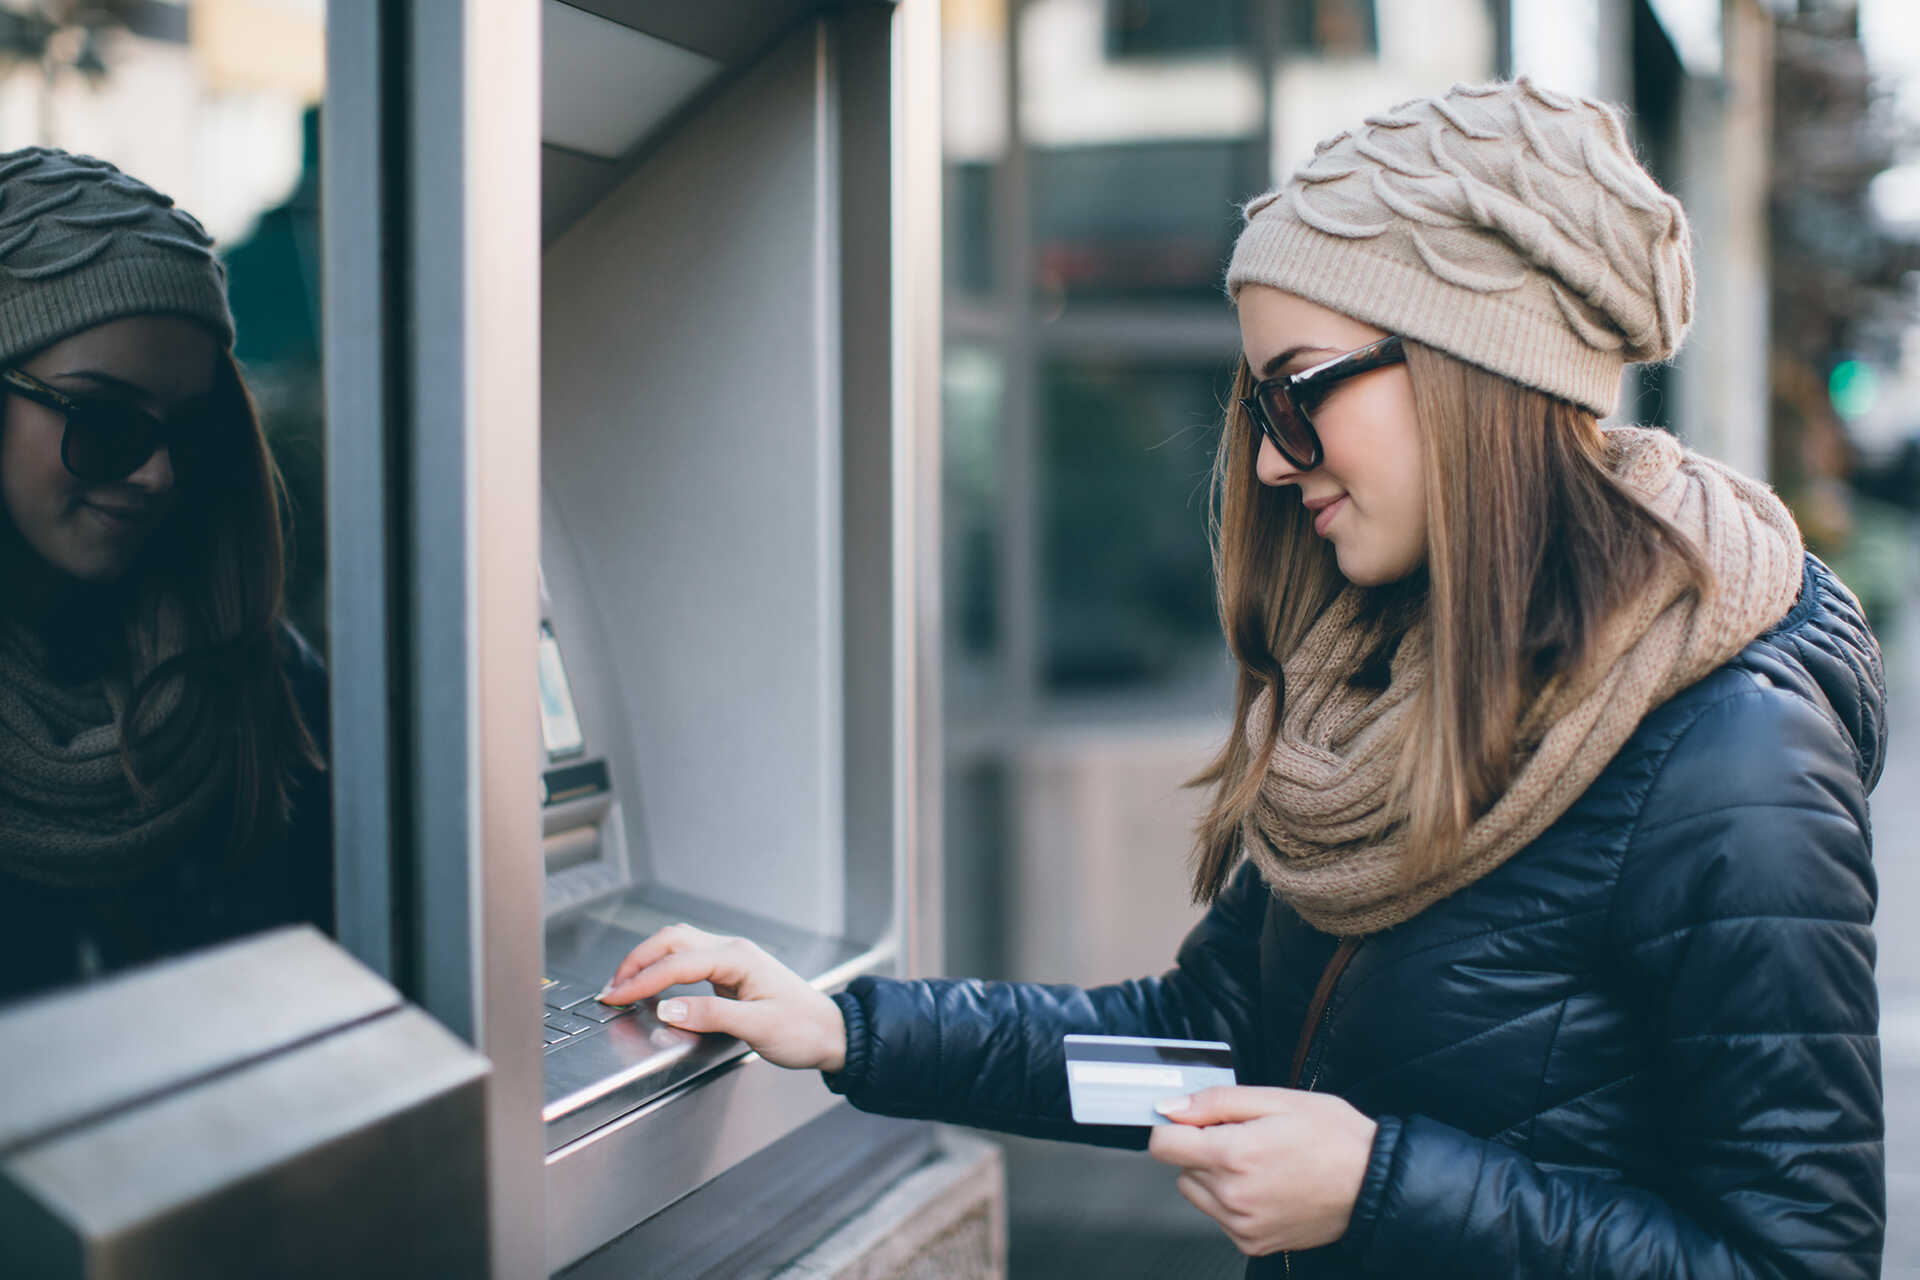 Student at a cash point